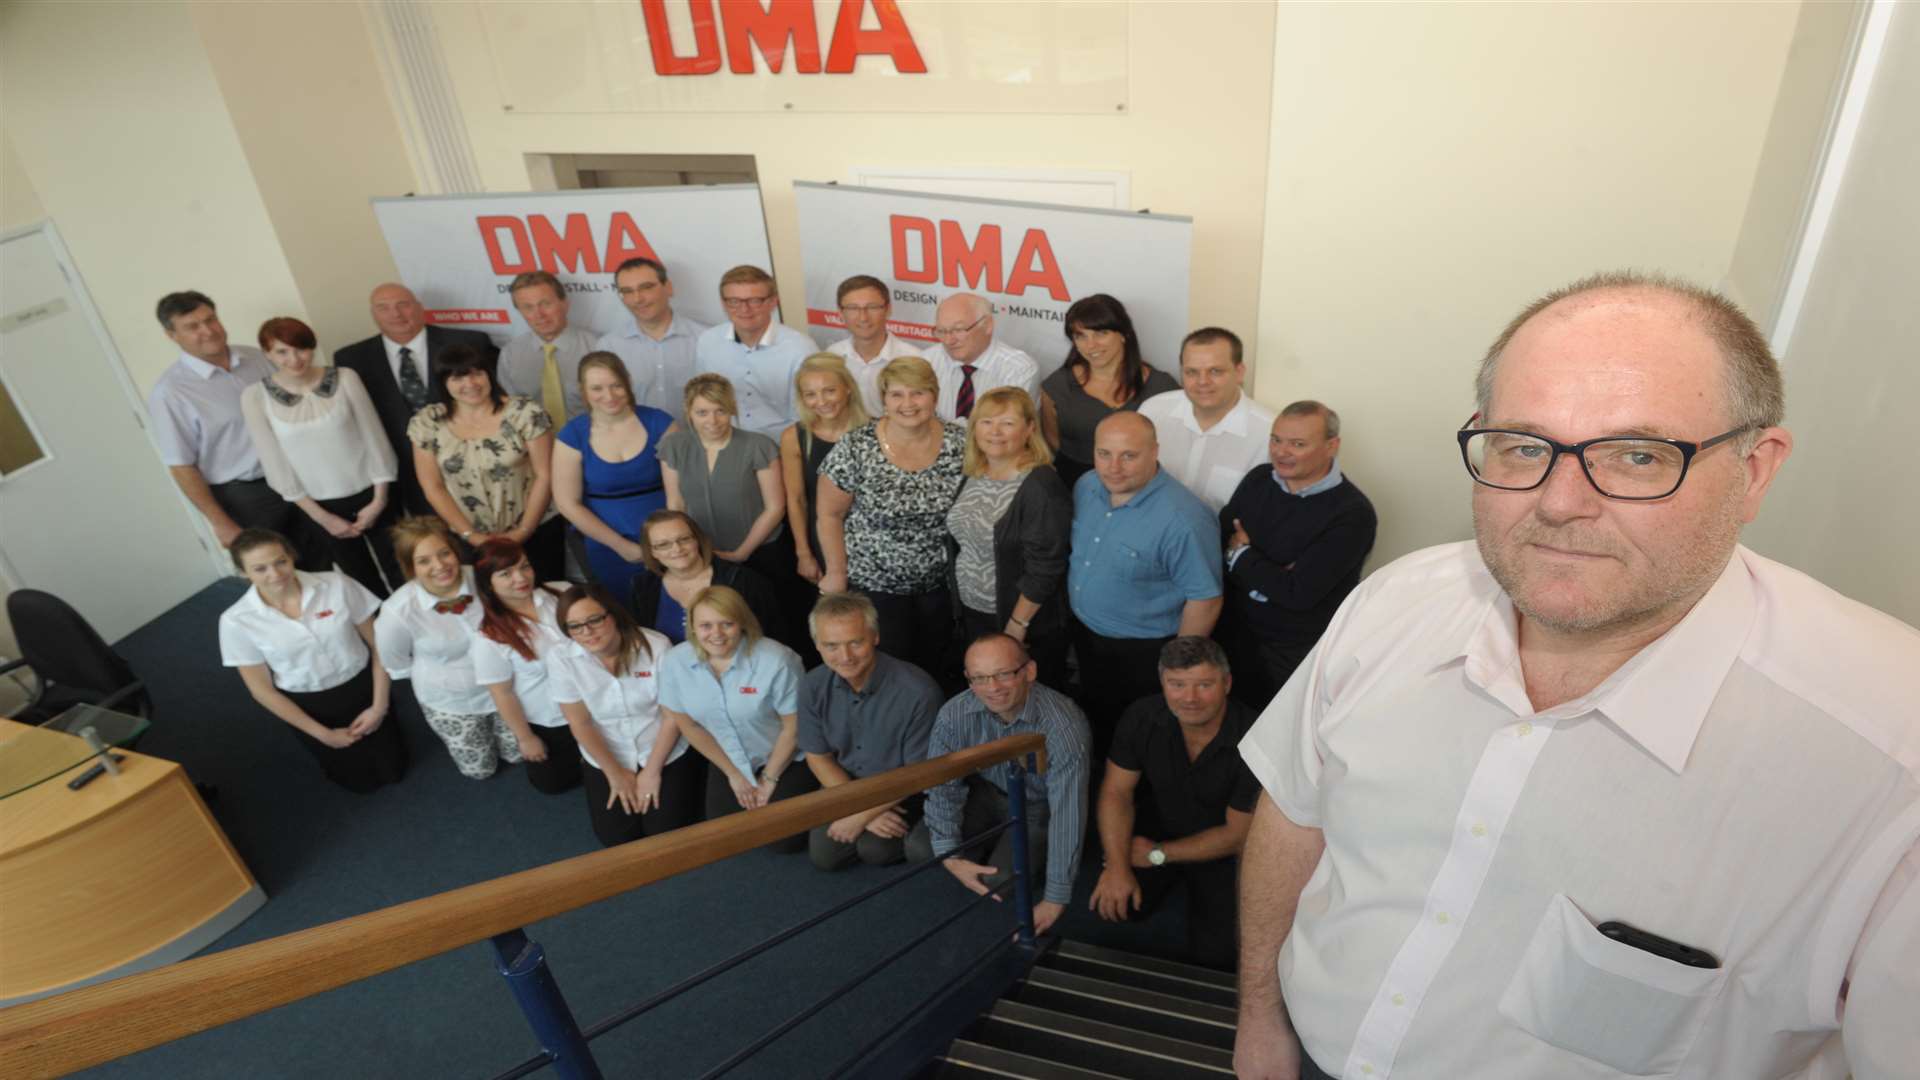 DMA Group managing director Pat Jackson with staff